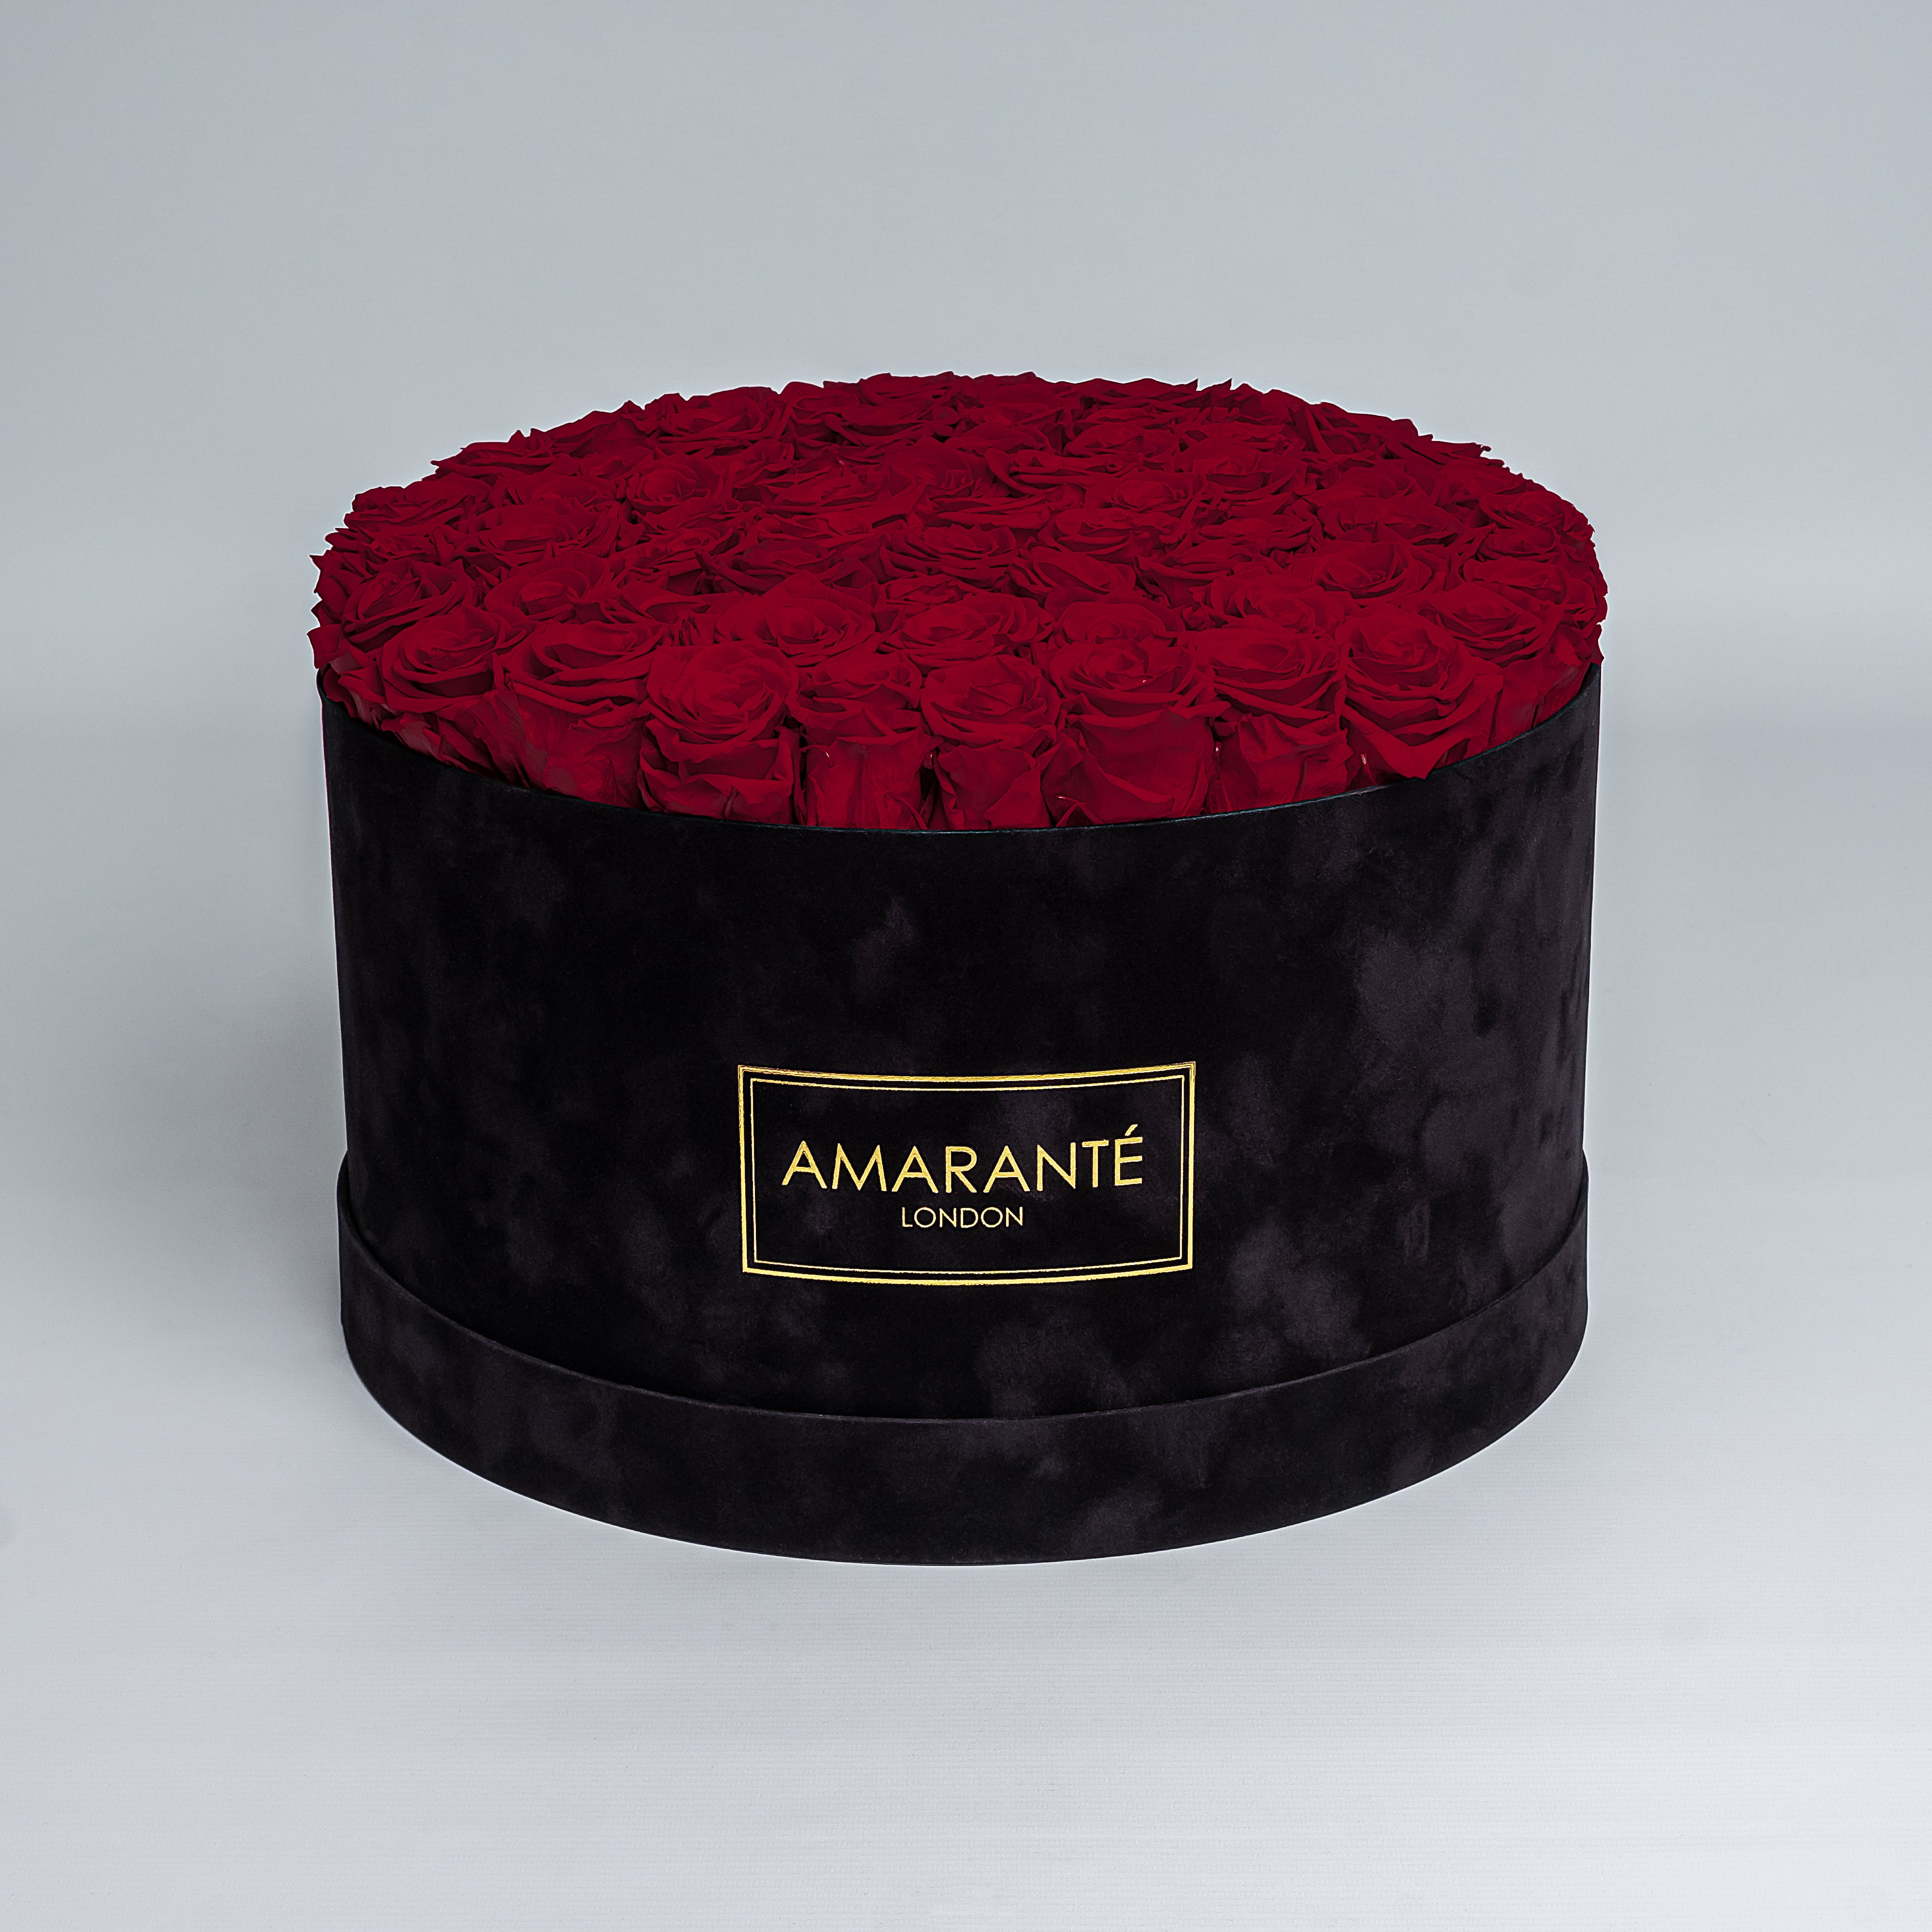 70 Exquisite dark red infinity roses elegantly arranged in a stylish black deluxe suede round rose box. Perfect for expressing timeless love and affection to family, friends and loved ones. Available for free UK delivery.